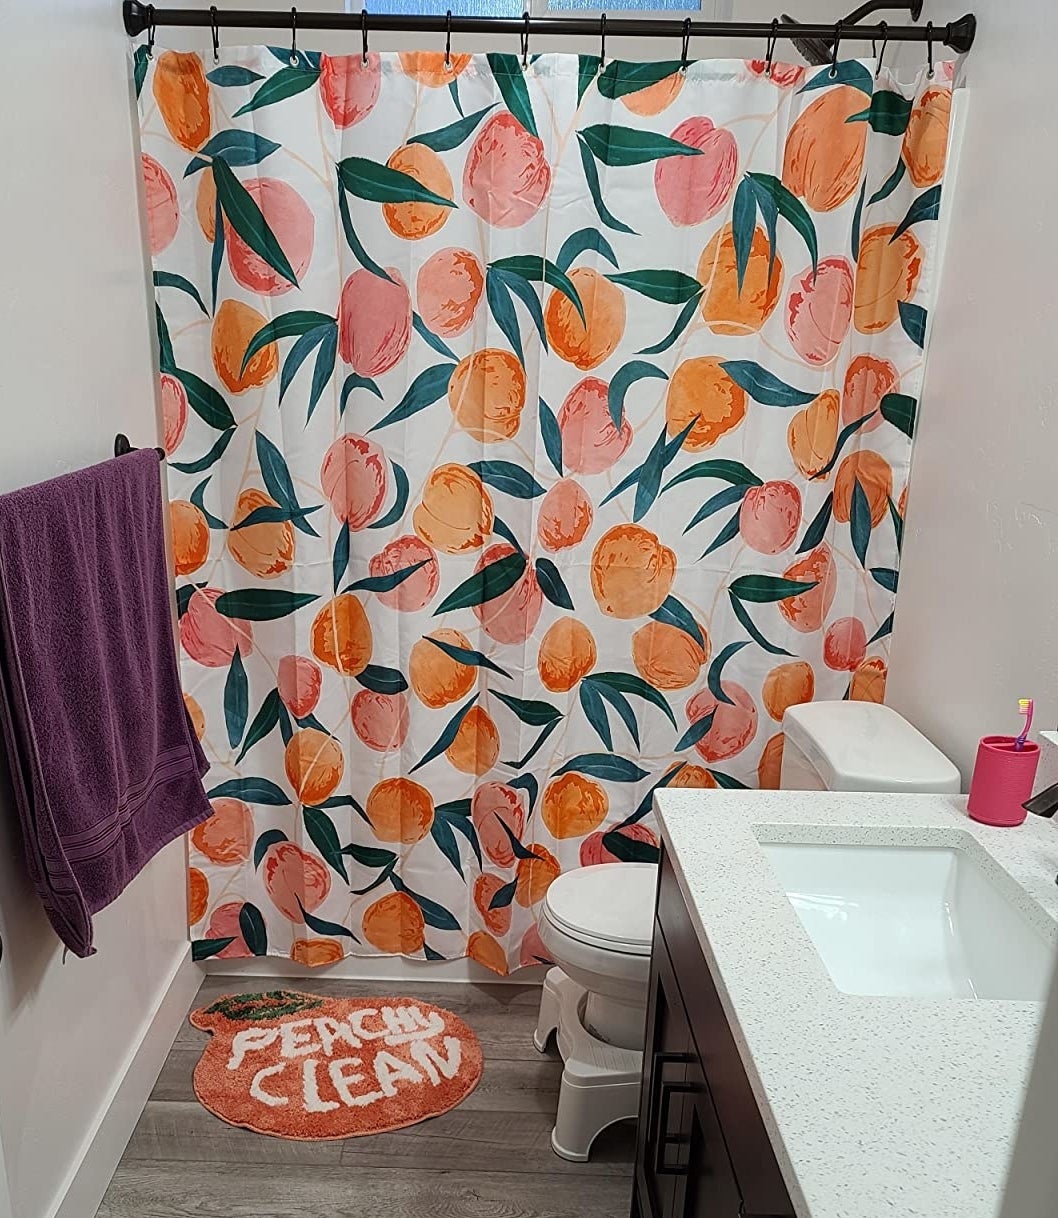 reviewer image of the white shower curtain with peach and orange illustrations of peaches with green leaves